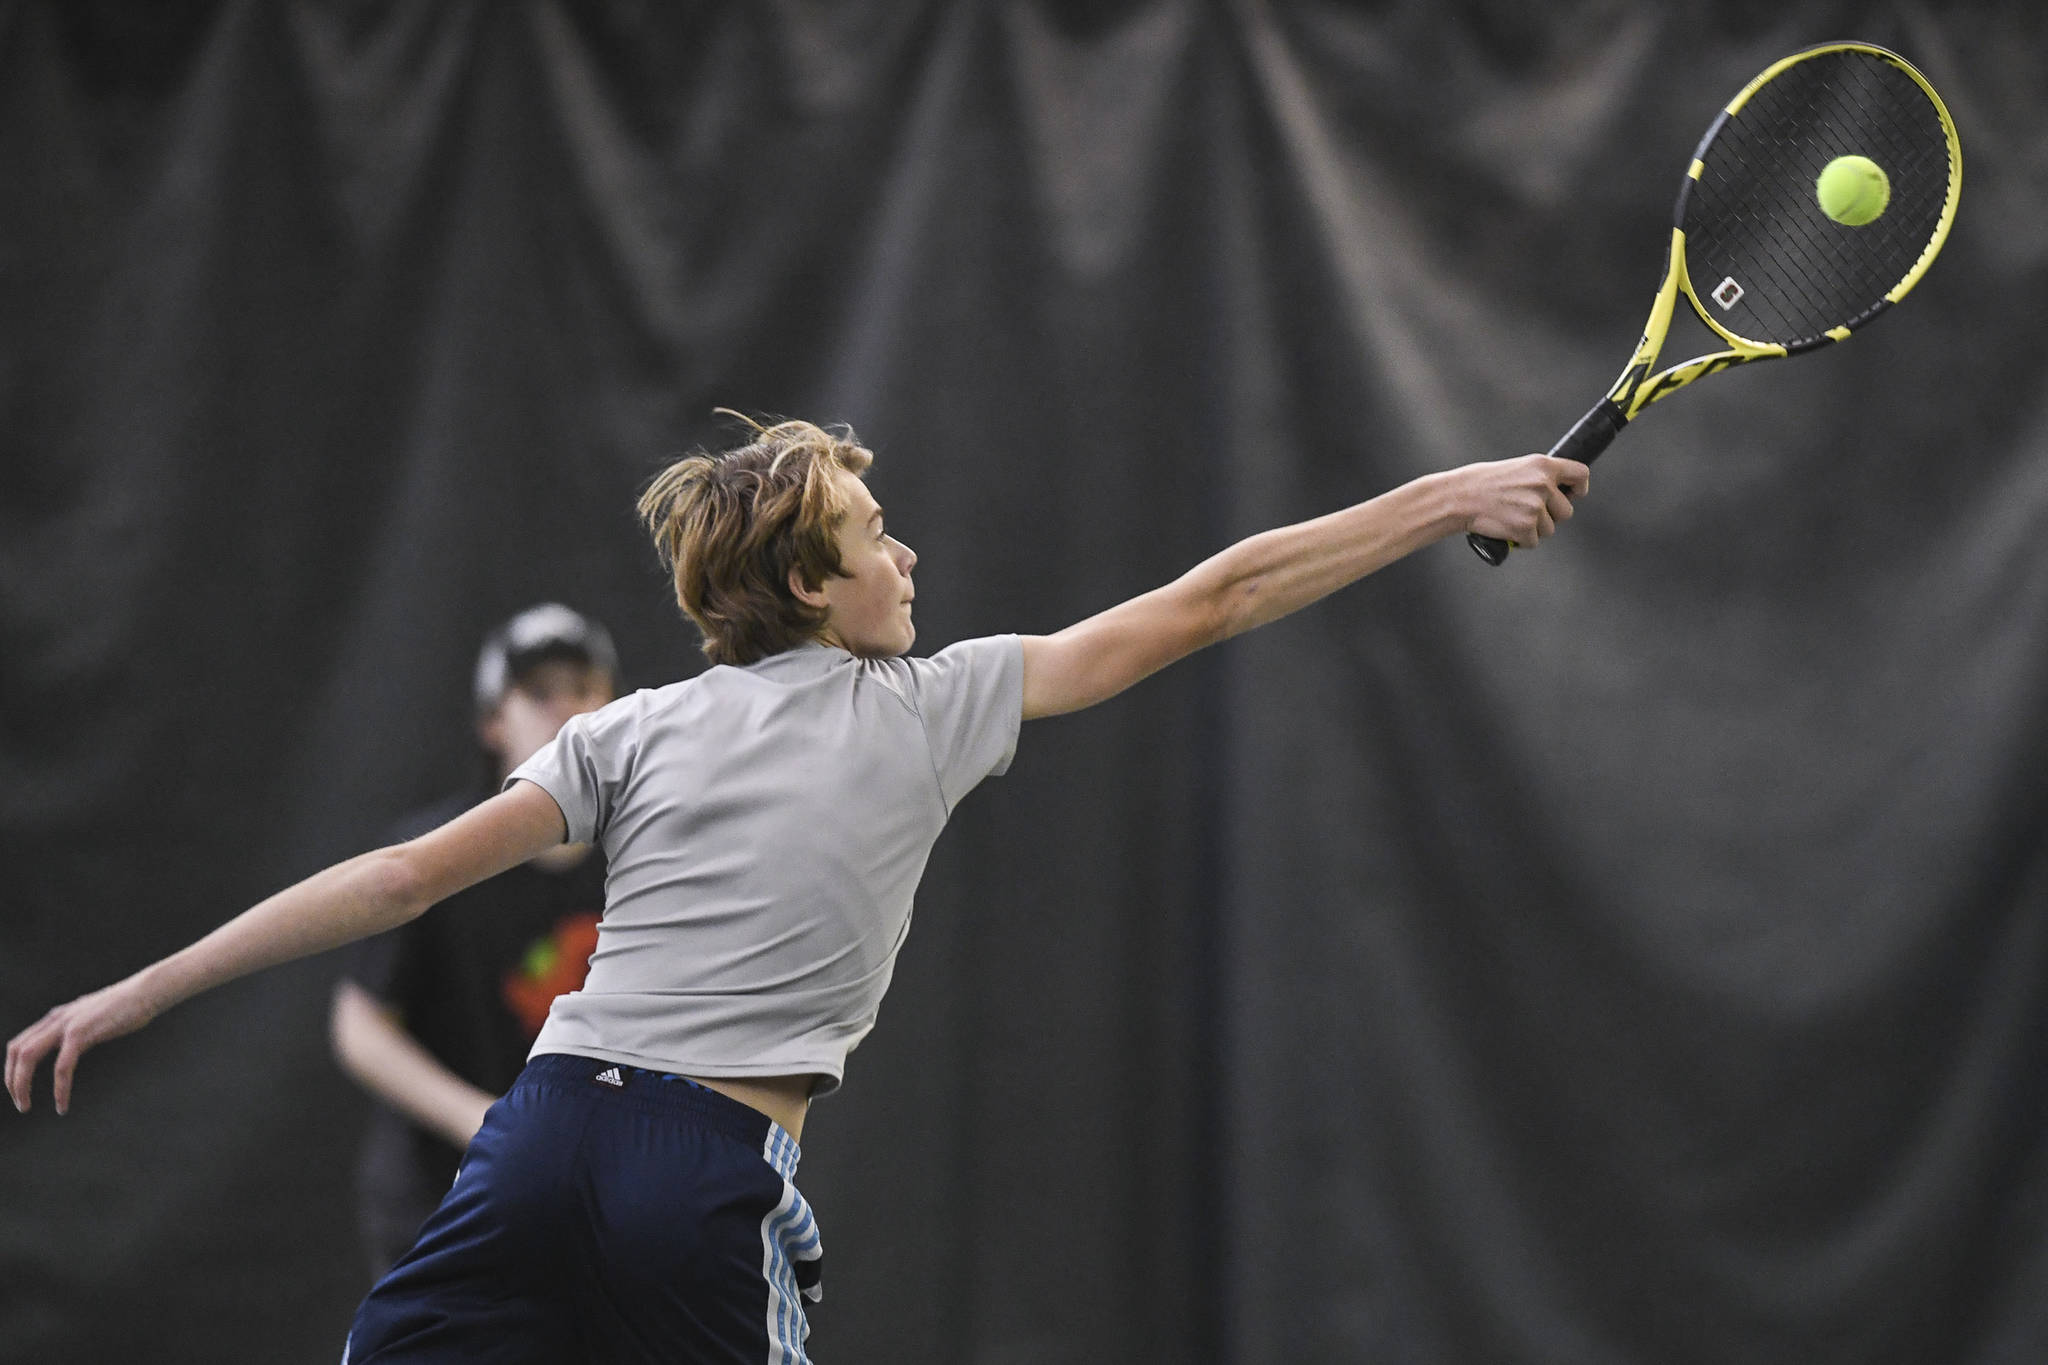 Will Rehfeldt returns a volley in a boys doubles’ semifinal with partner William Smoker against Liam Penn and Callan Smith during the Region V Tennis Tournament at The Alaska Club/JRC on Saturday, Sept. 28, 2019. Smoker/Rehfeldt won 7-6, 6-2. (Michael Penn | Juneau Empire)